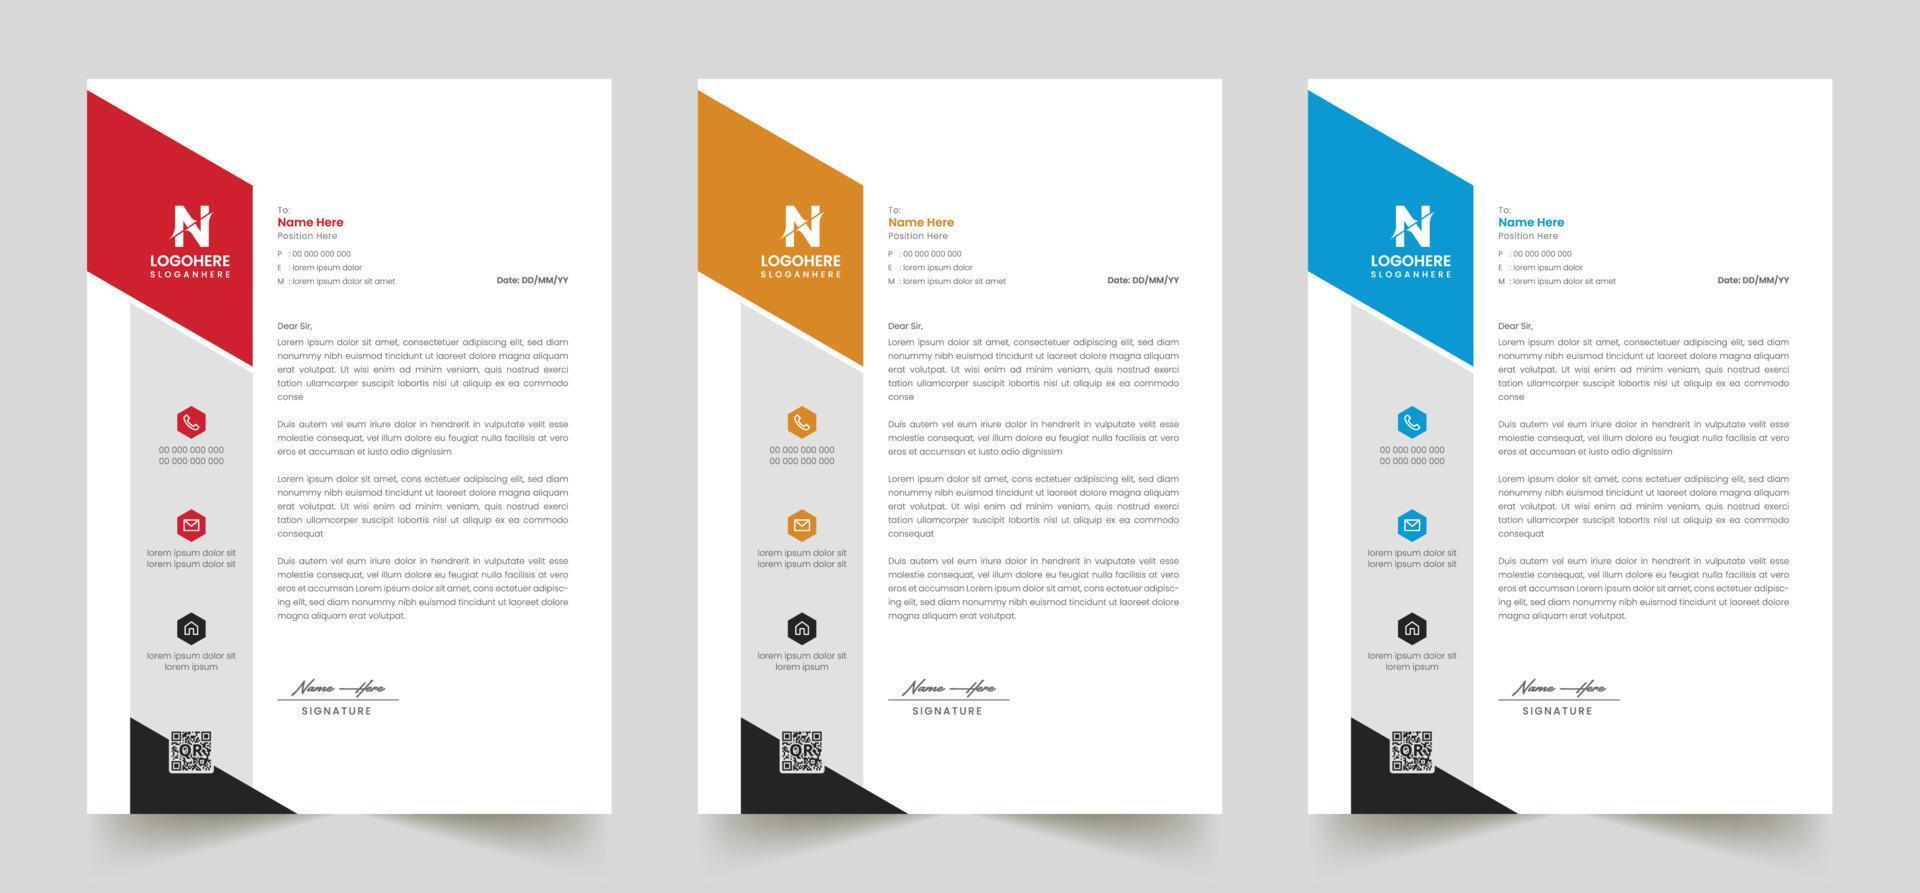 Multipurpose corporate businesses template with a4 size. a stationery item with modern letterhead. green, blue, red, and yellow with four color variations. vector